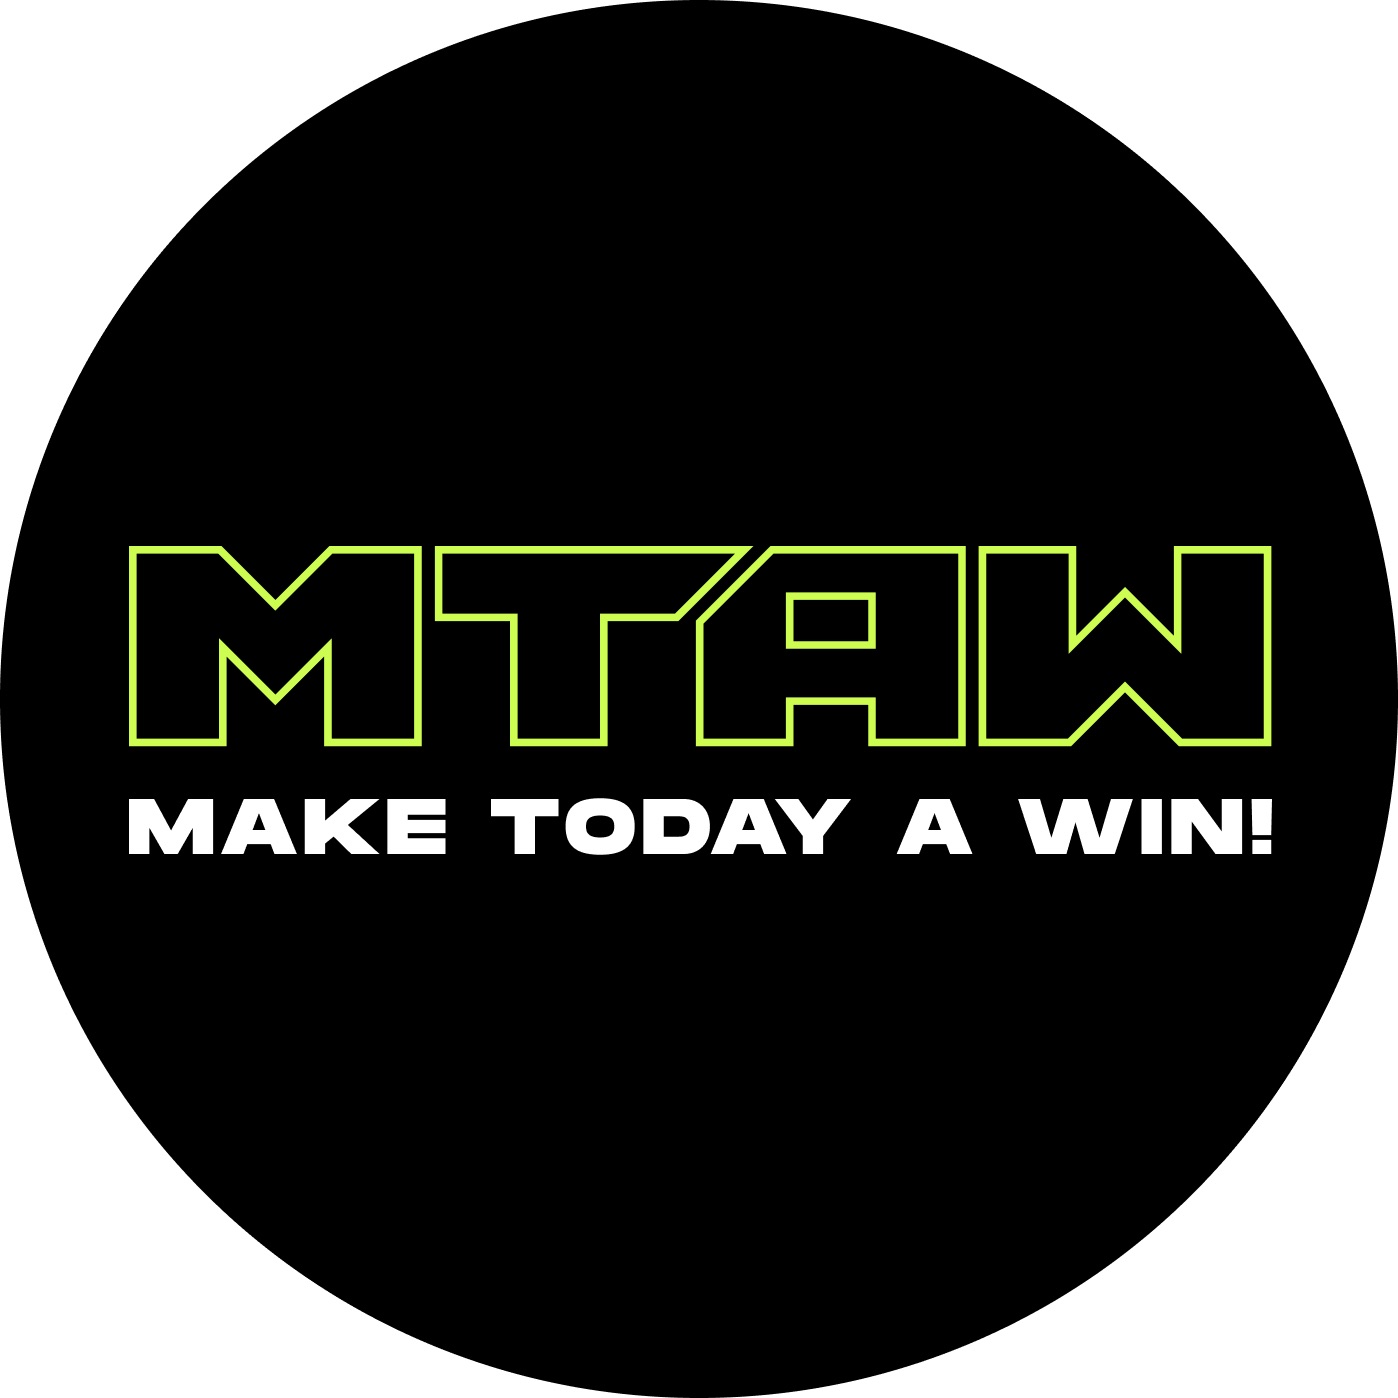 MTAW - Make Today A Win!